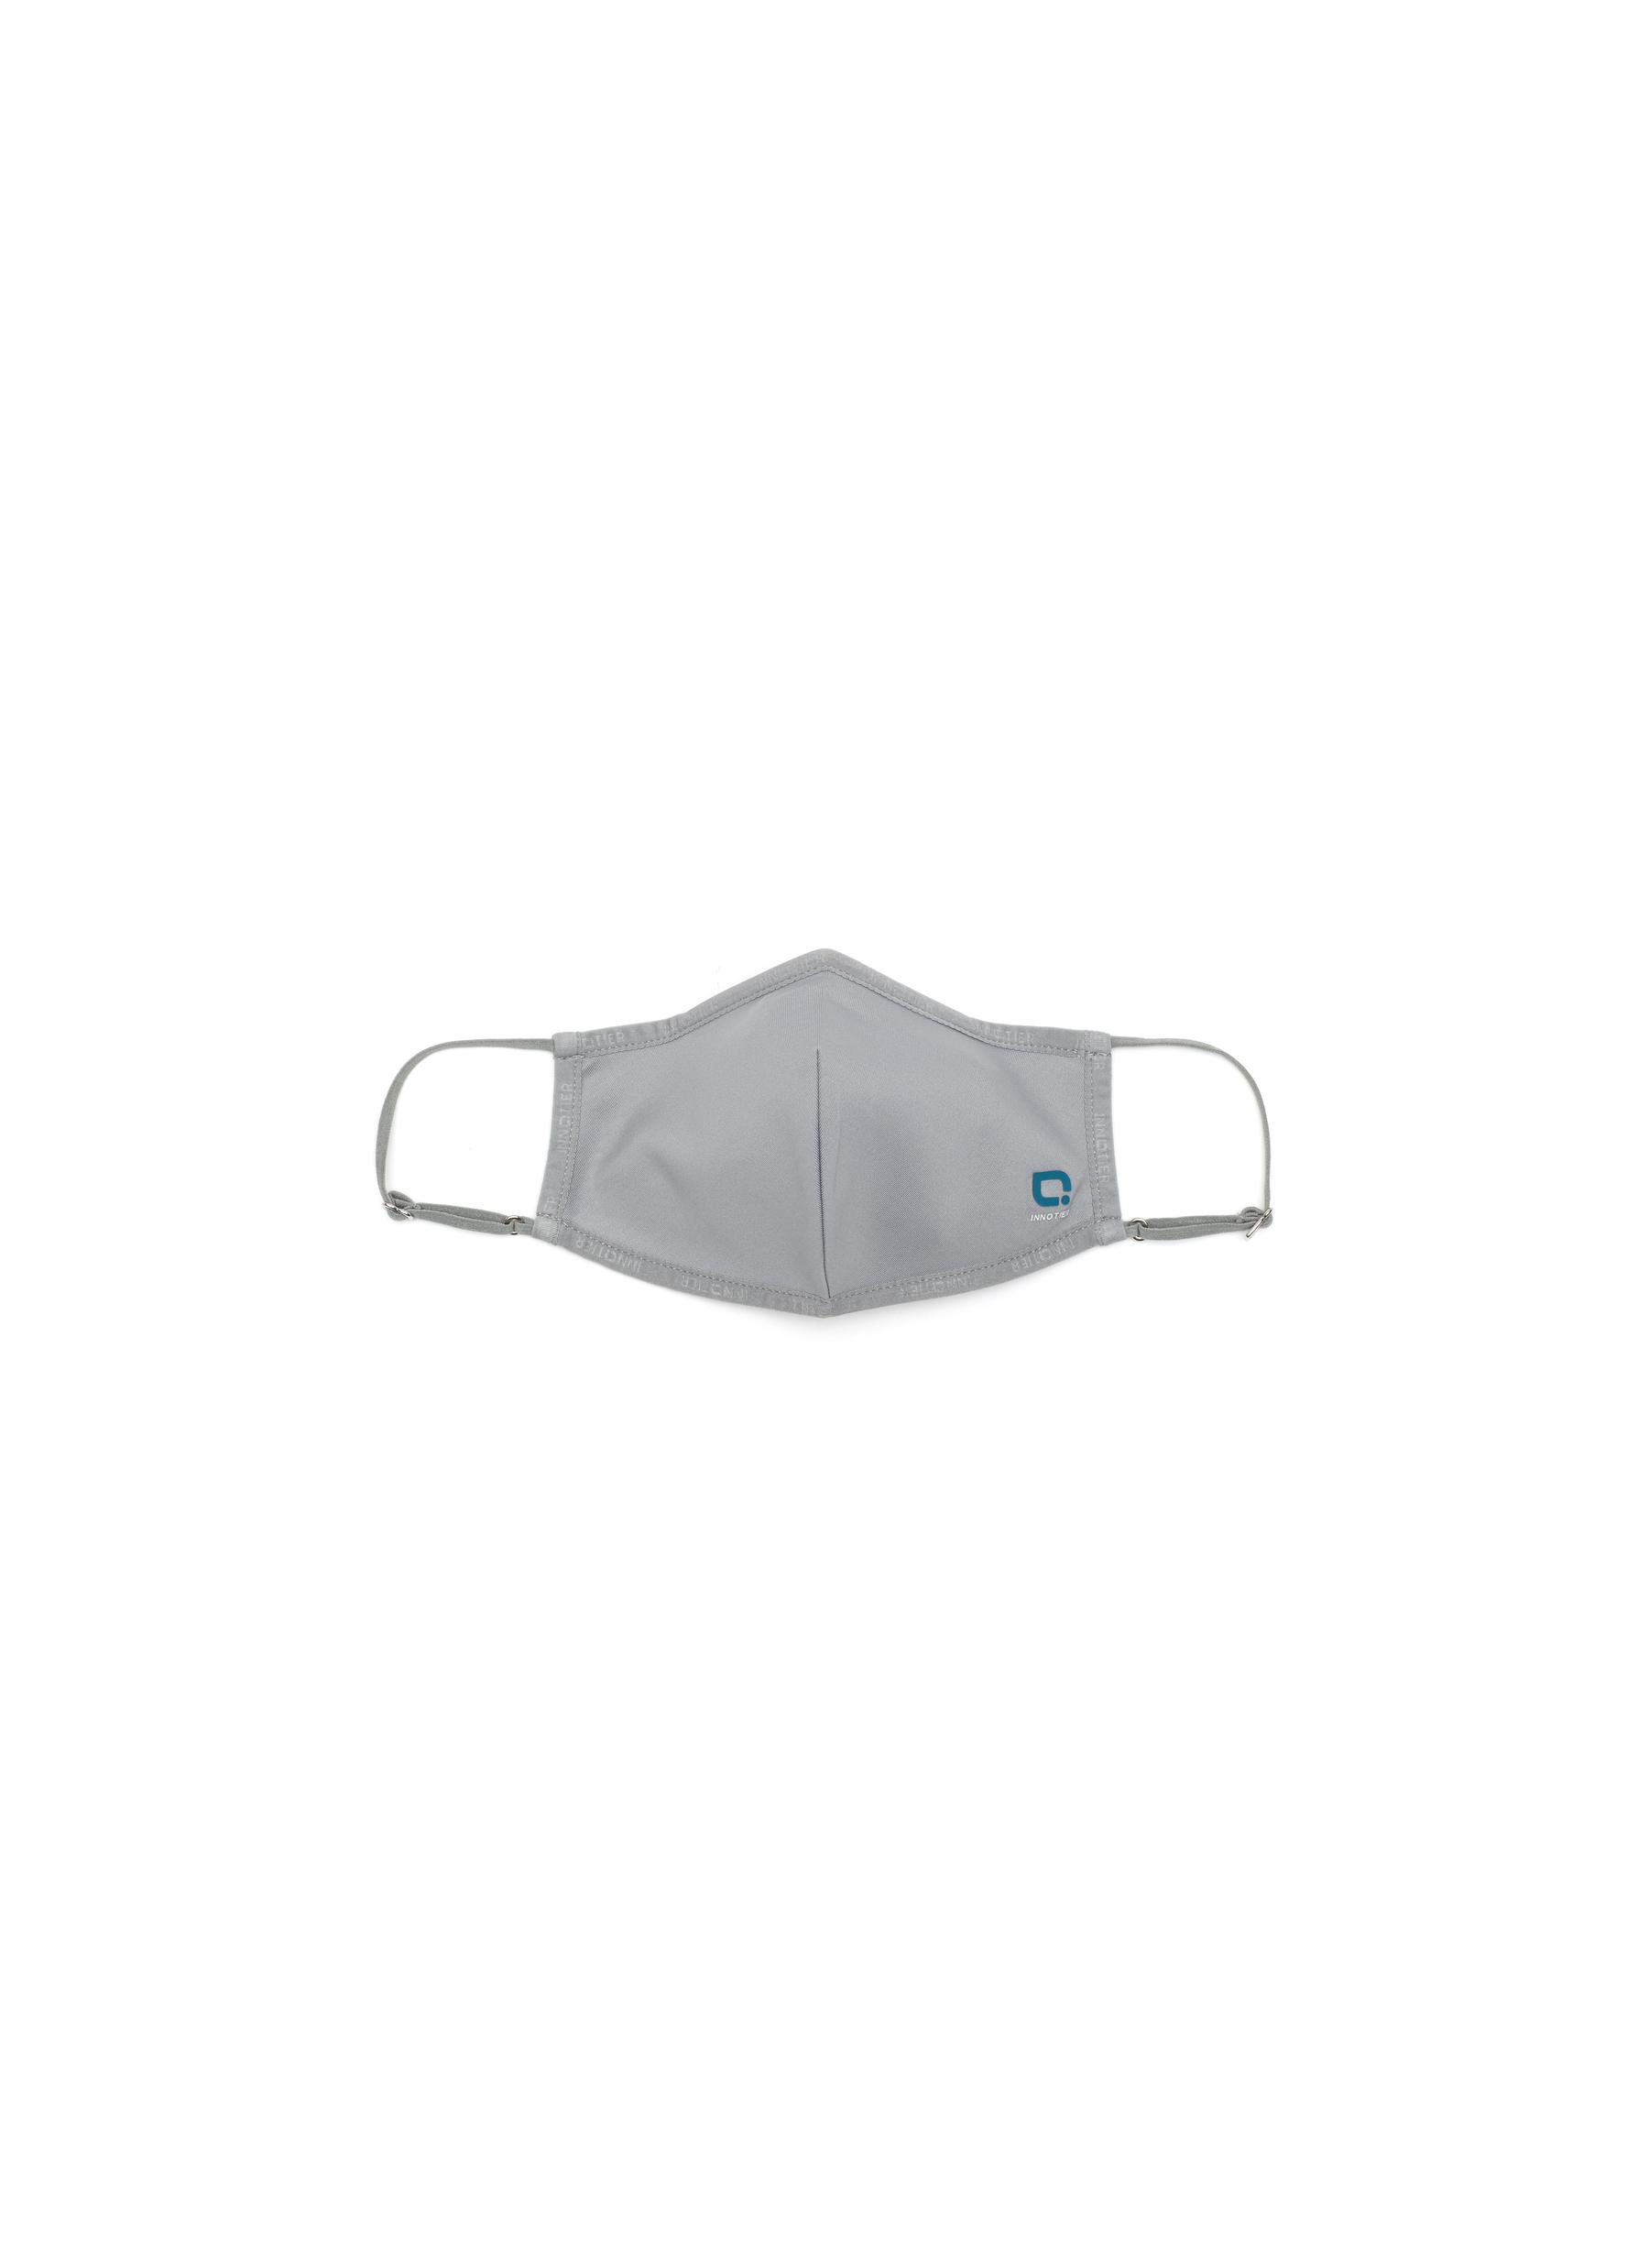 Innotier Innoshield Champion Series Sxm99 Adult Extra Reusable Face Mask - Peppery In Grey